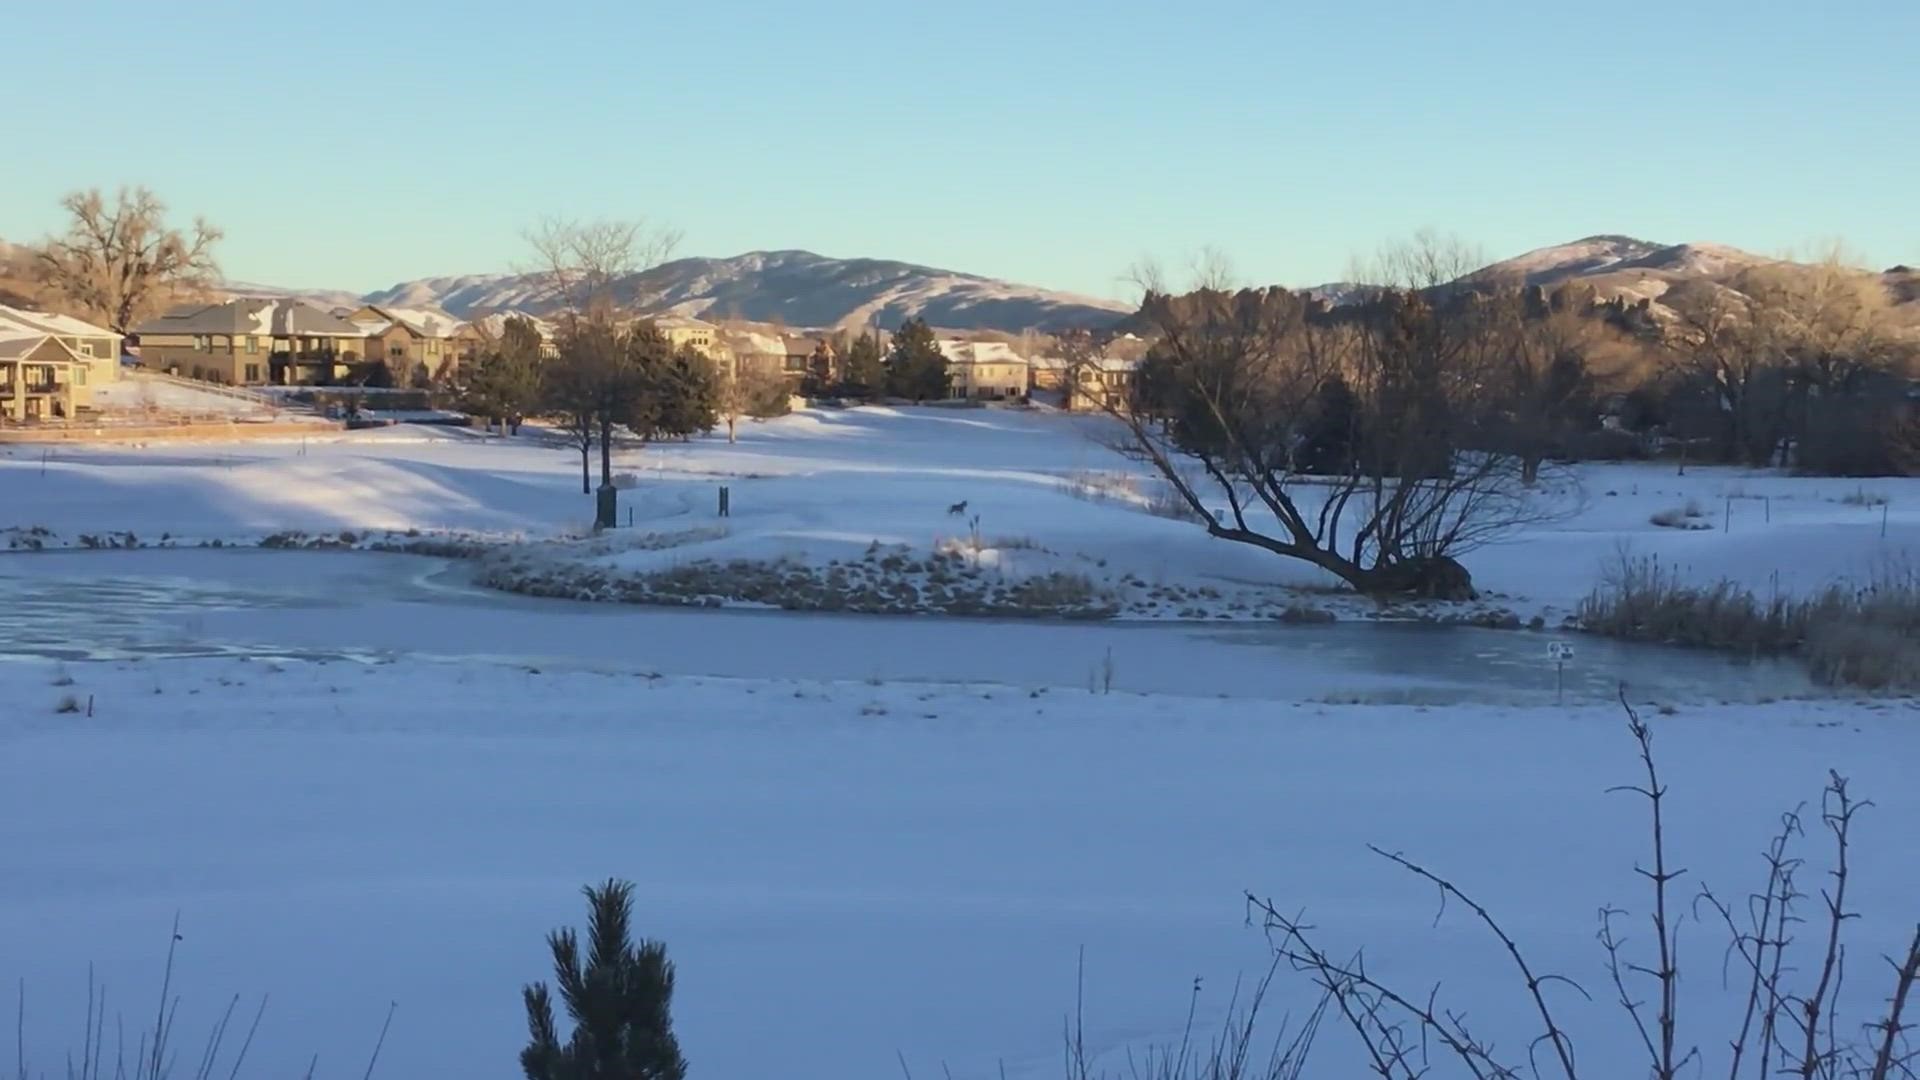 I spotted three coyotes on the golf course looking for food. I got two of them in this short video.
Credit: Brian Buckmaster